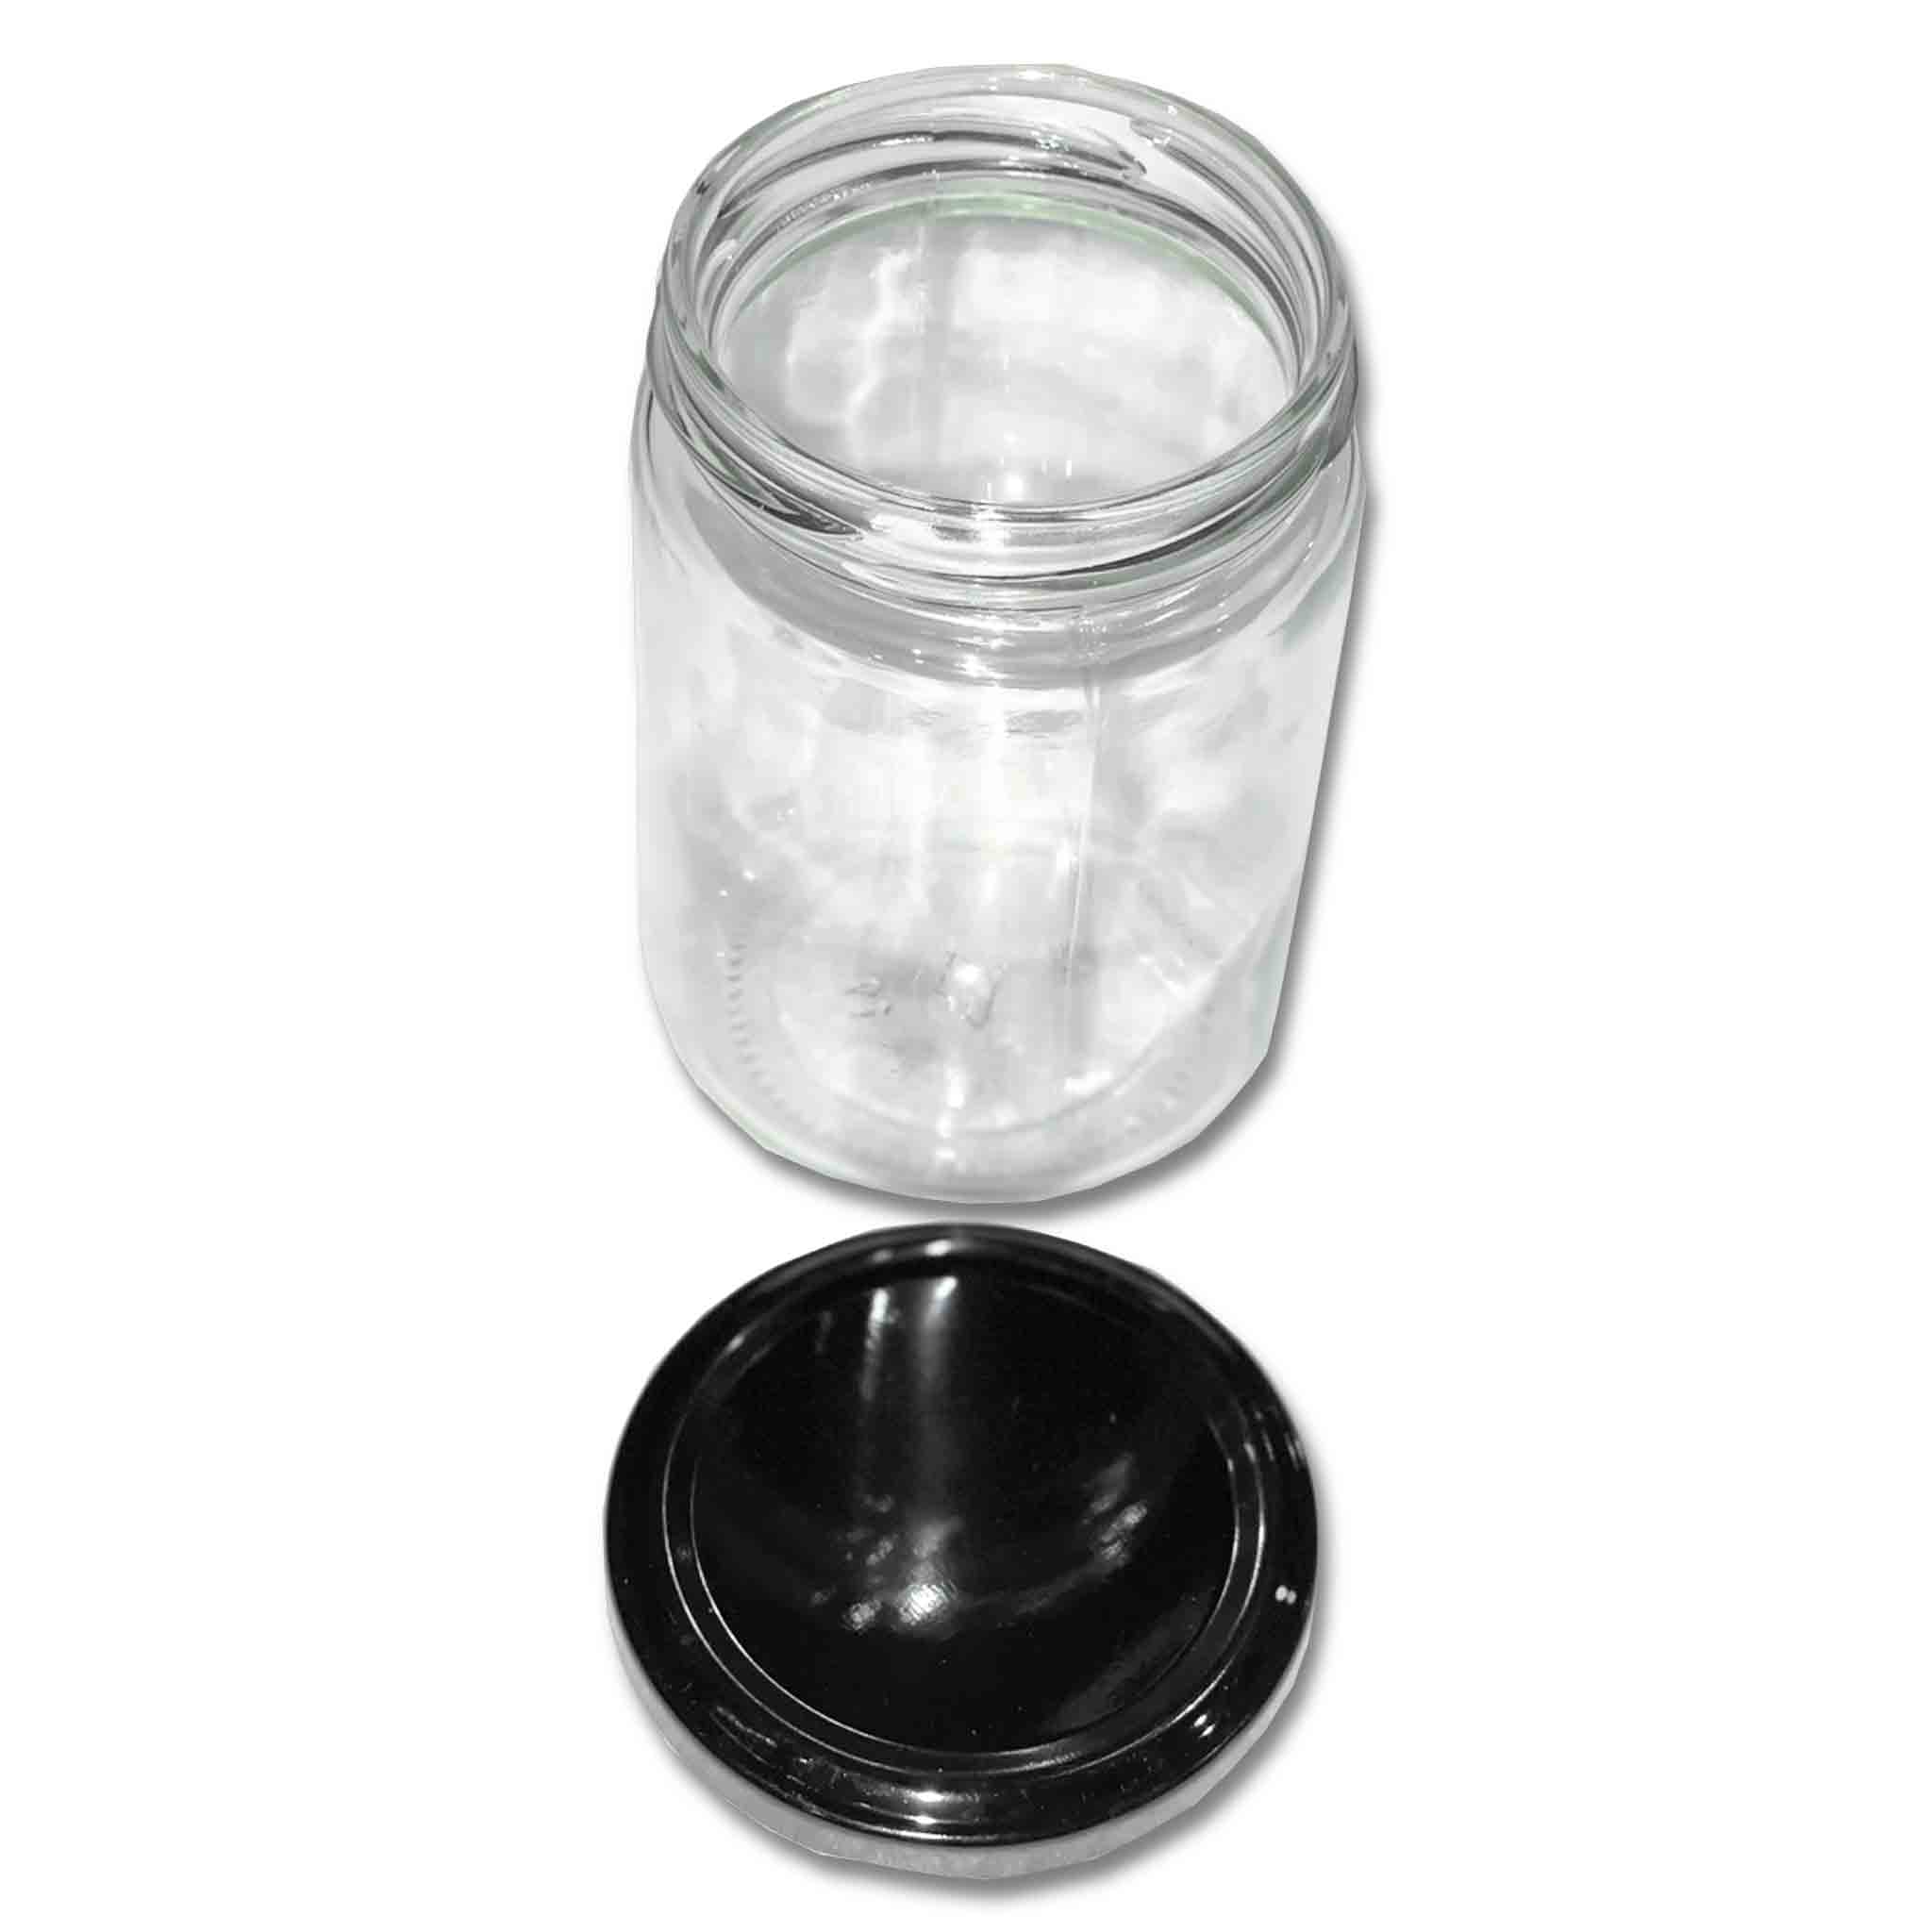 Honey Round Clear Glass Jar - 380ml (105 Pack) - Processing collection by Buzzbee Beekeeping Supplies